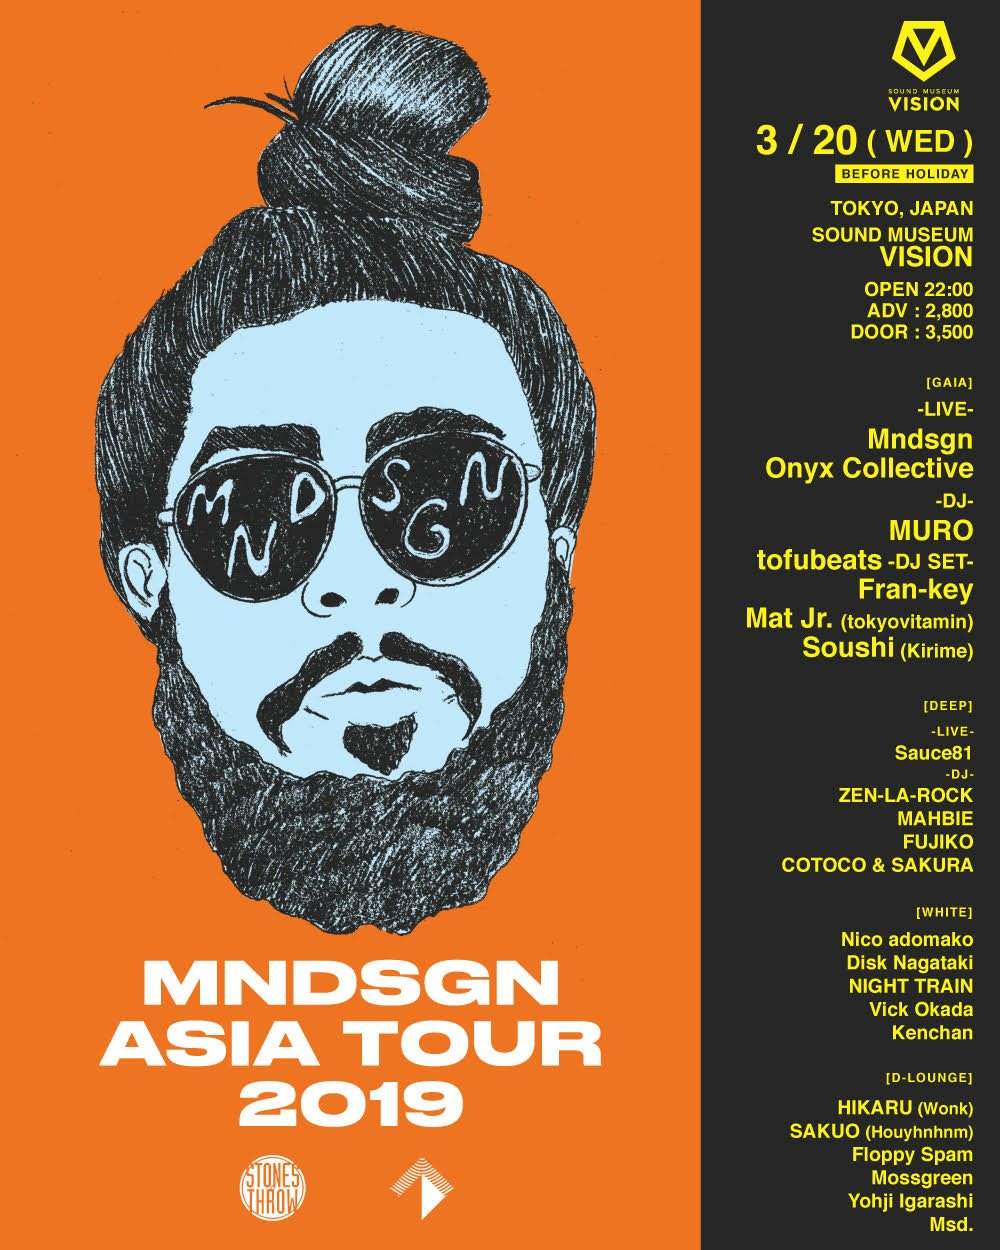 Mndsgn From LA (Stones Throw) Tokyo Show. Support Acts: Onyx Collective From NY. Muro, Sauce 81 - Flyer front